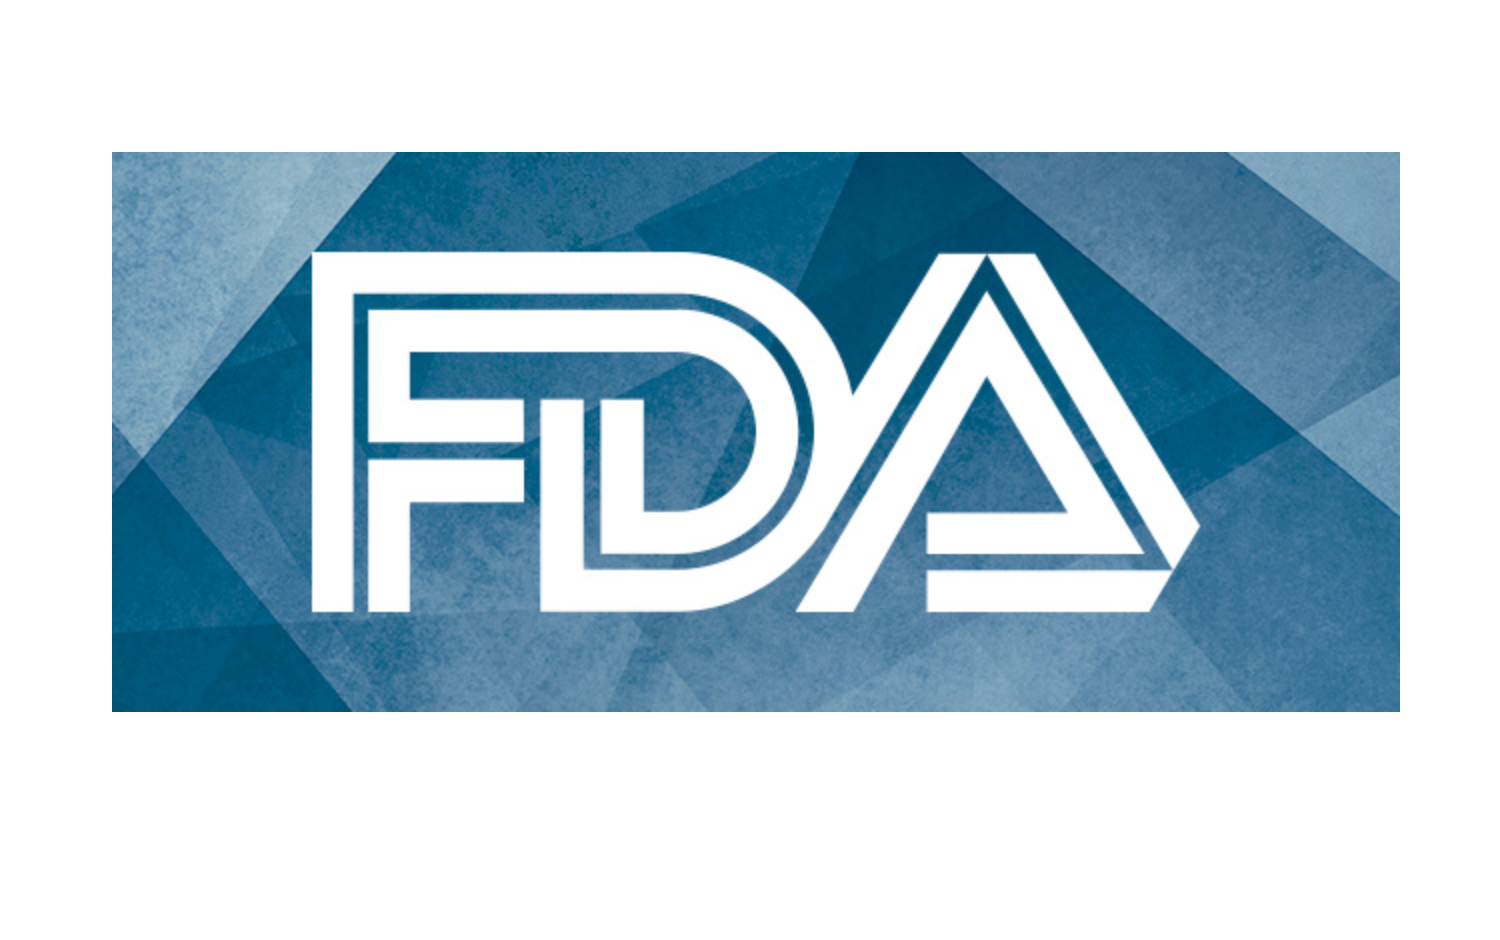 FDA Issues Alert Cautioning Against the Use of Glucose Control Product Containing Metformin, Glyburide